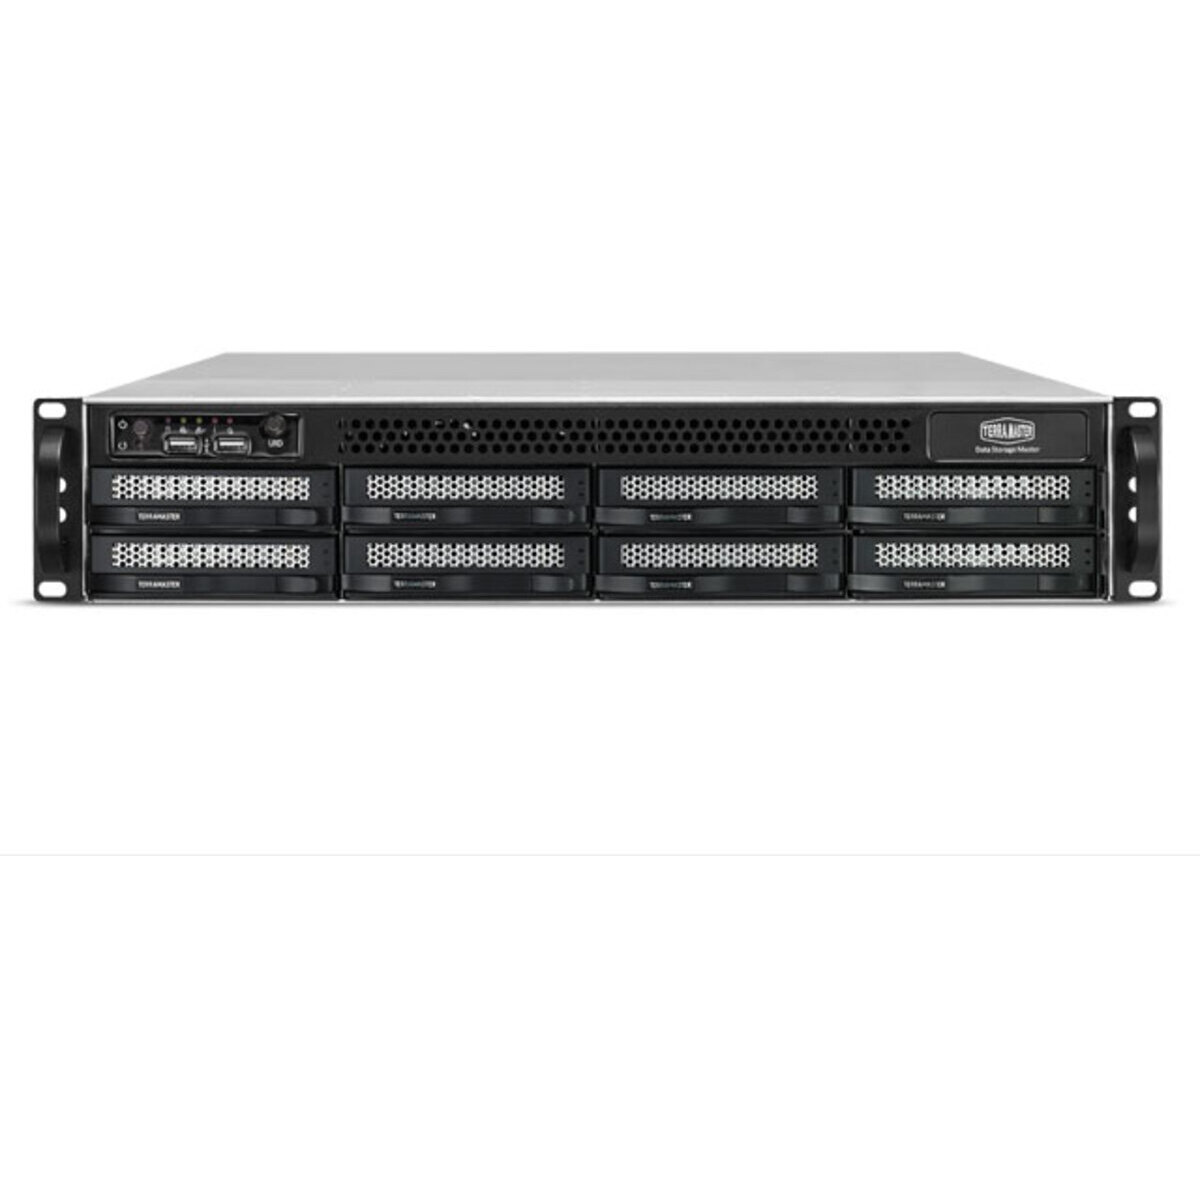 TerraMaster U8-522-9400 2tb 8-Bay RackMount Large Business / Enterprise NAS - Network Attached Storage Device 4x500gb Crucial MX500 CT500MX500SSD1 2.5 560/510MB/s SATA 6Gb/s SSD CONSUMER Class Drives Installed - Burn-In Tested U8-522-9400